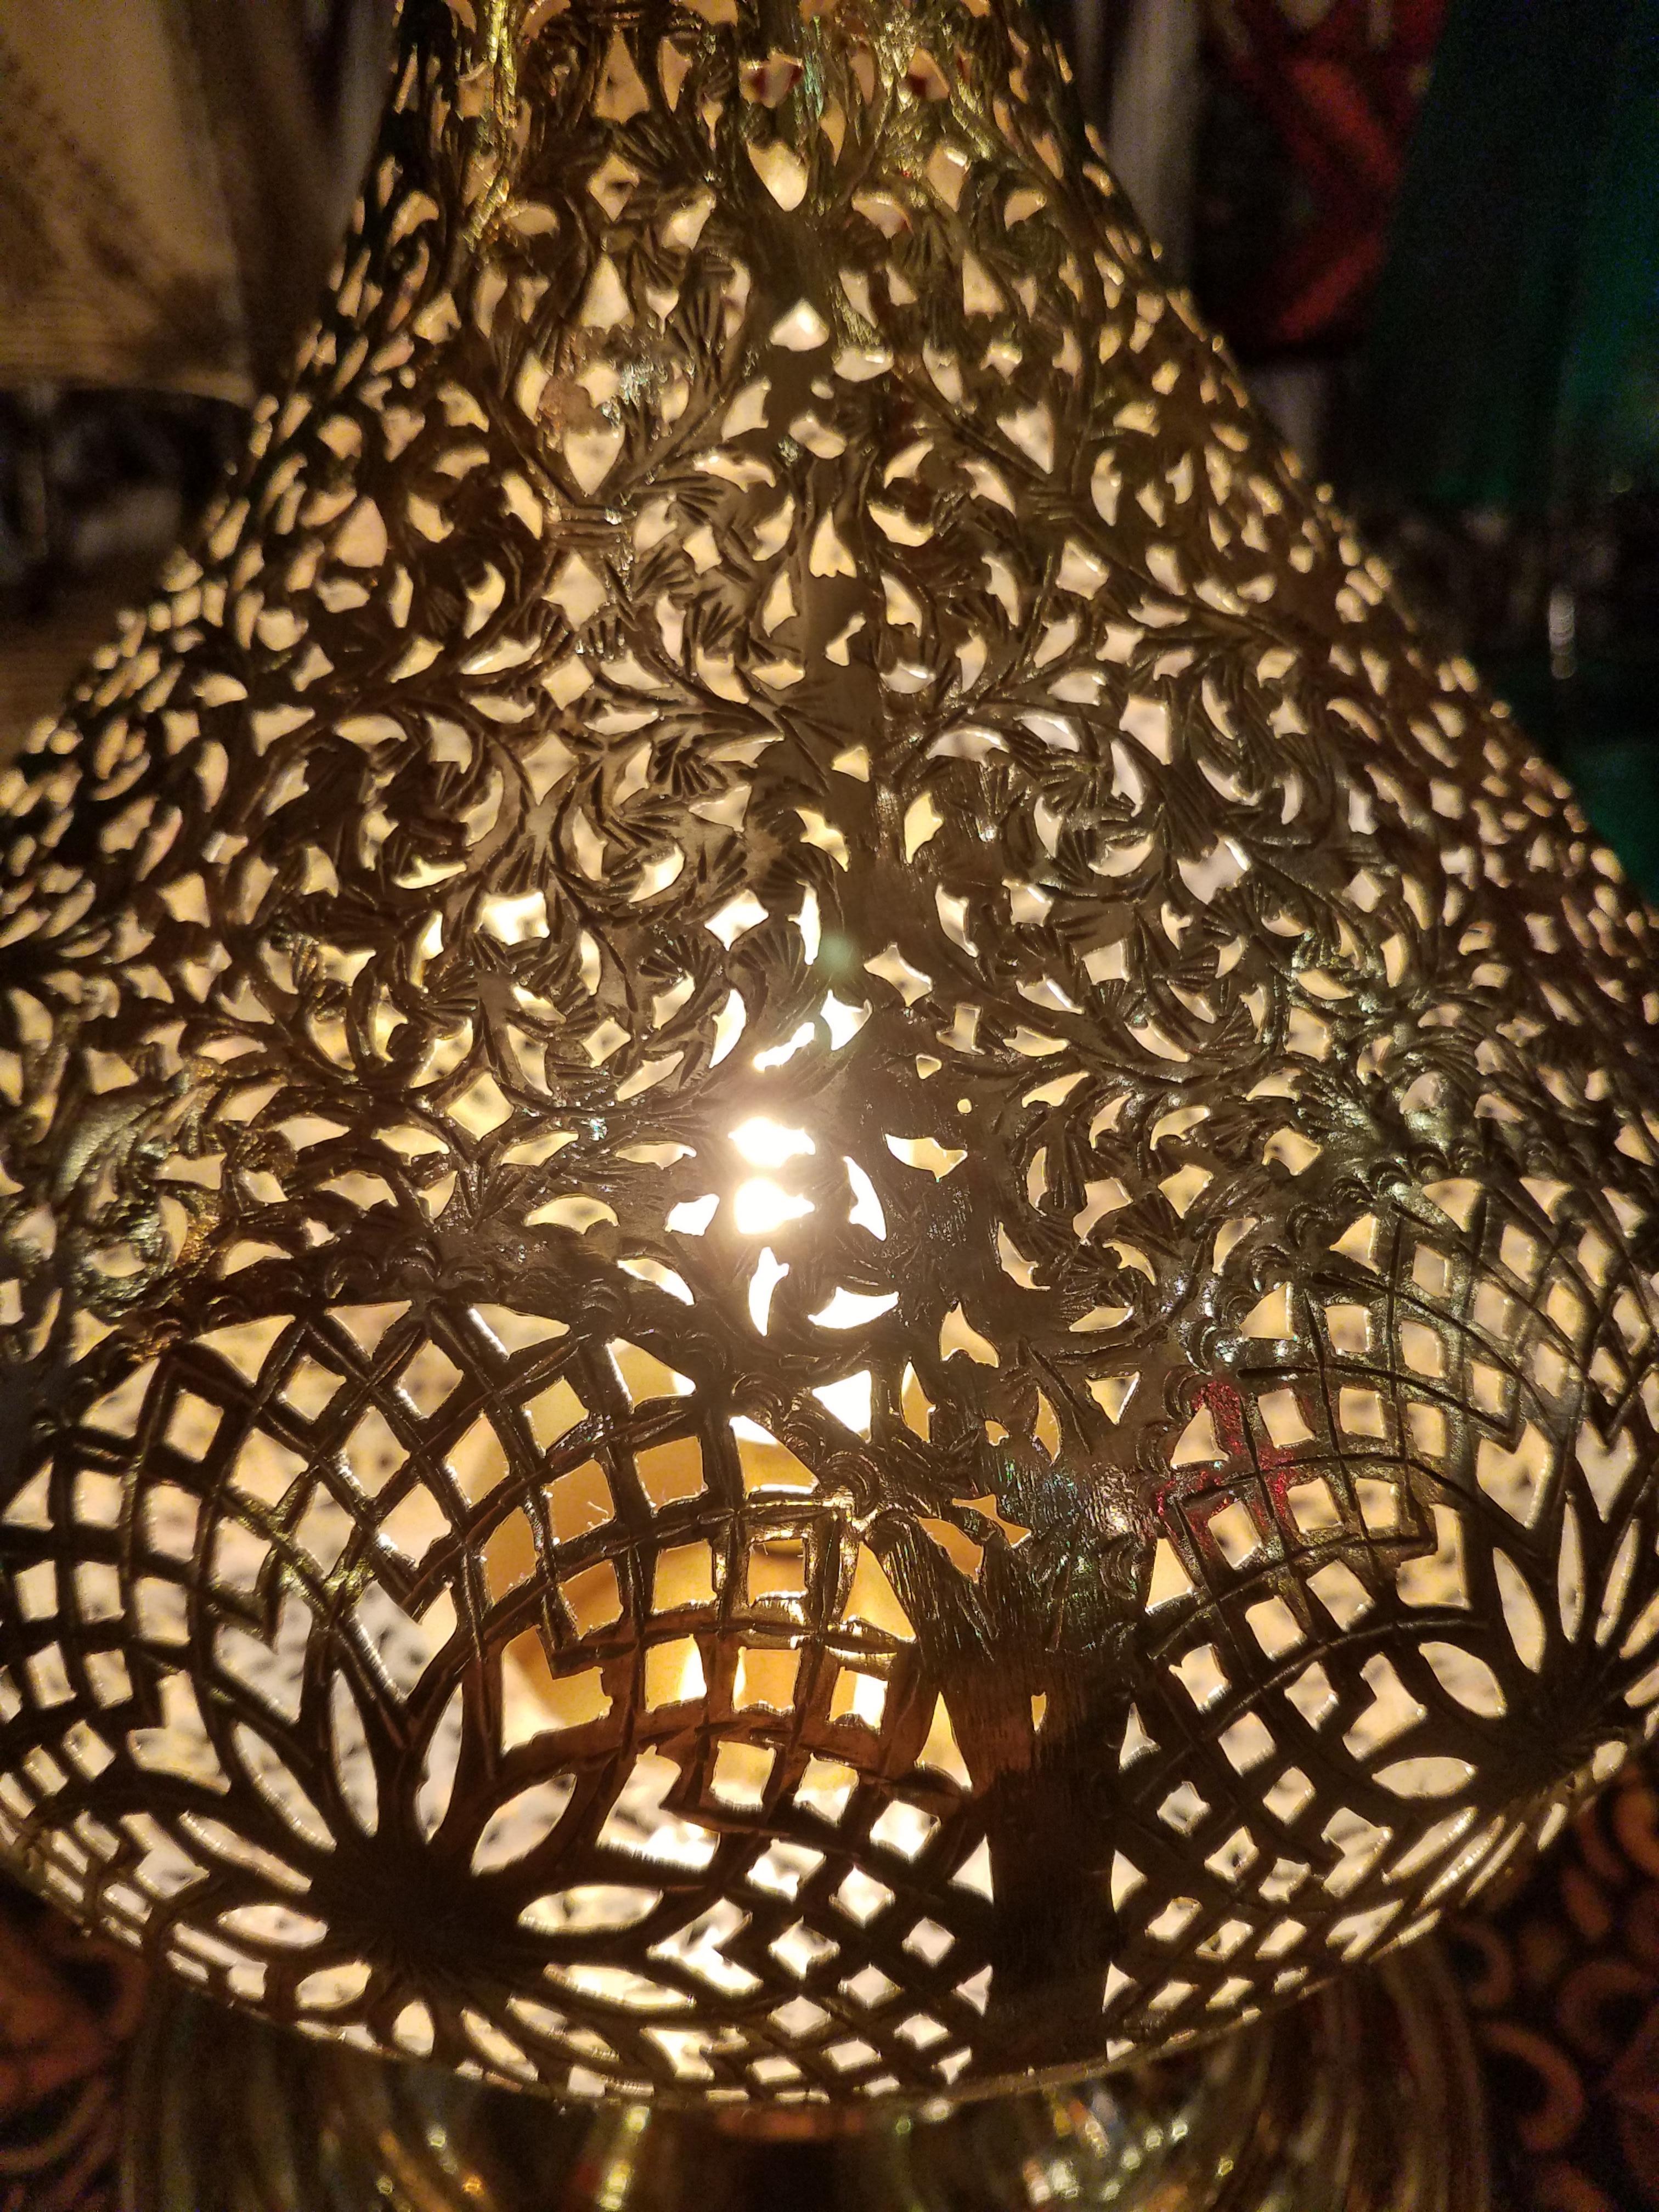 Hammered Medium Intricate Moroccan Copper Lamp or Lantern, Table Lamp